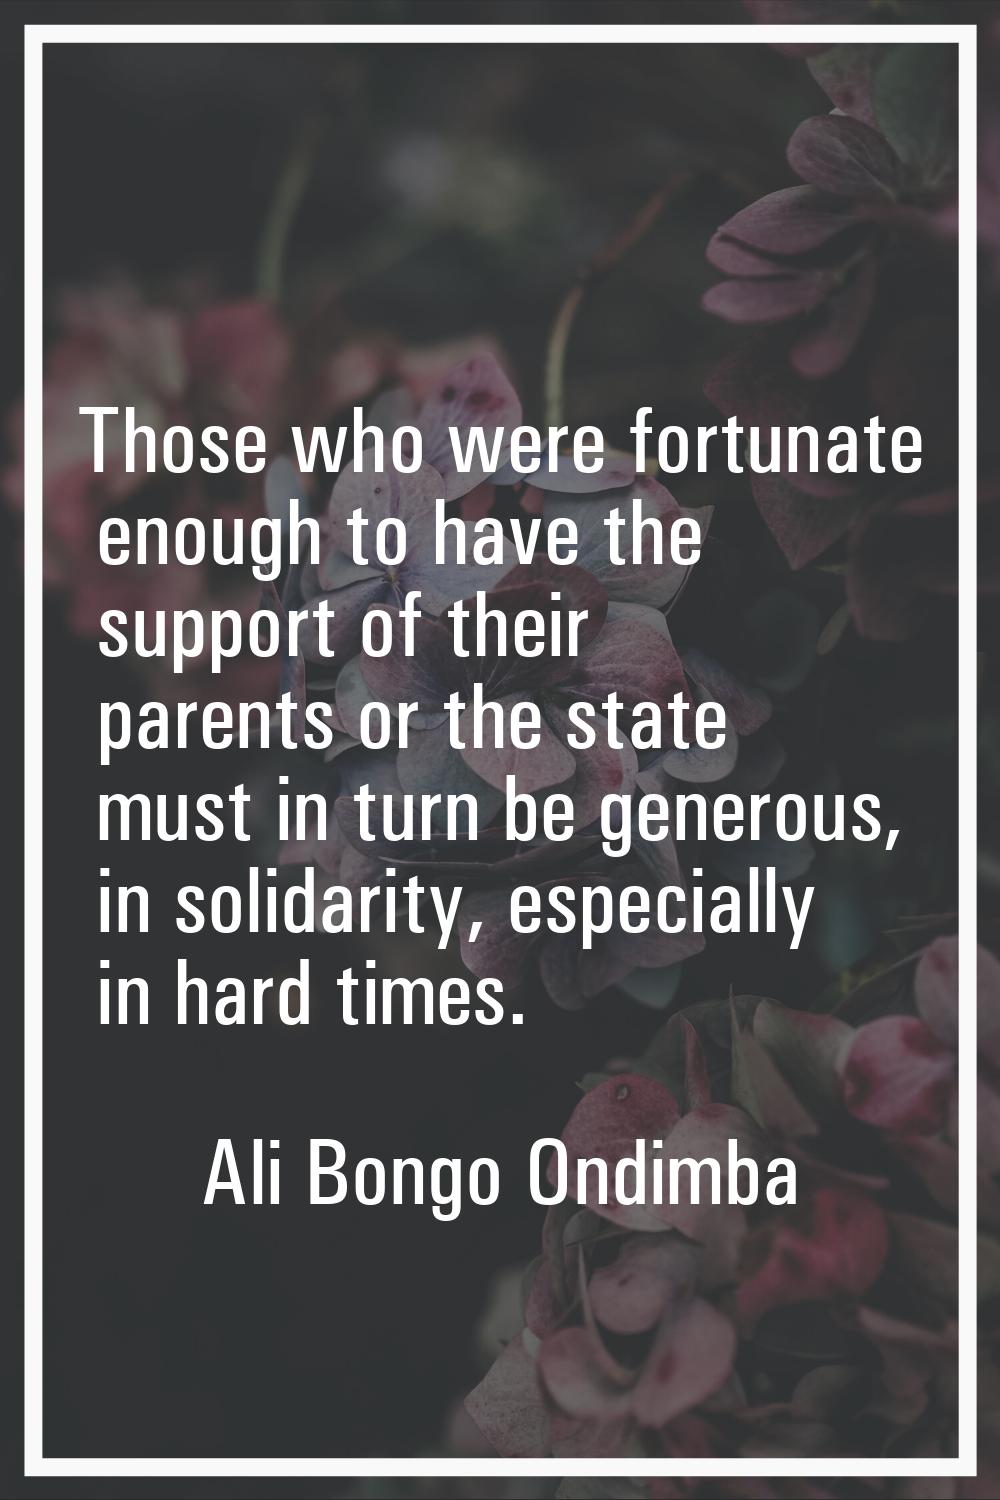 Those who were fortunate enough to have the support of their parents or the state must in turn be g